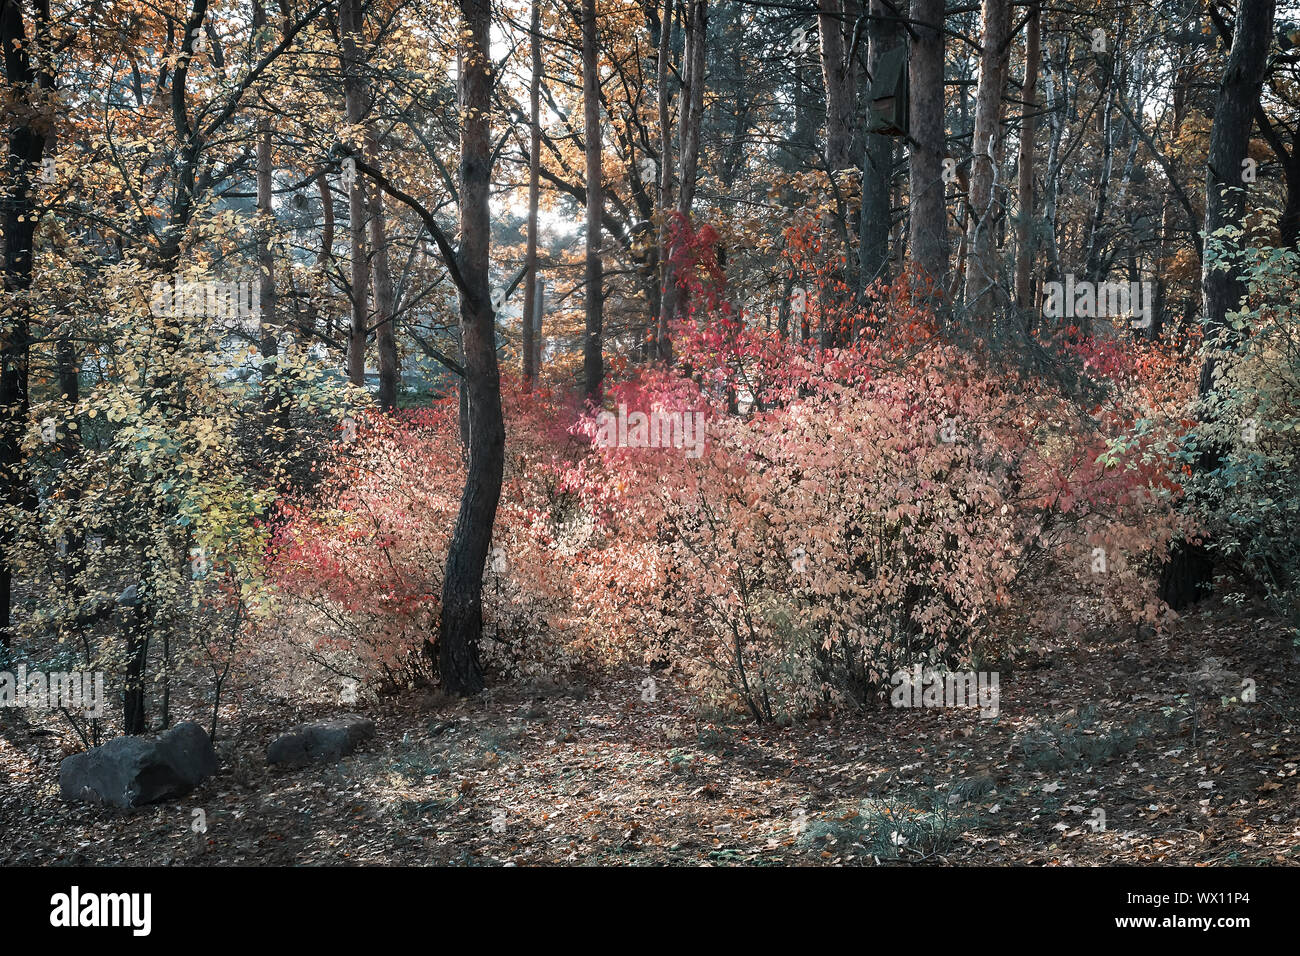 Autumn landscape in the forest with a shrub with red leaves. Stock Photo